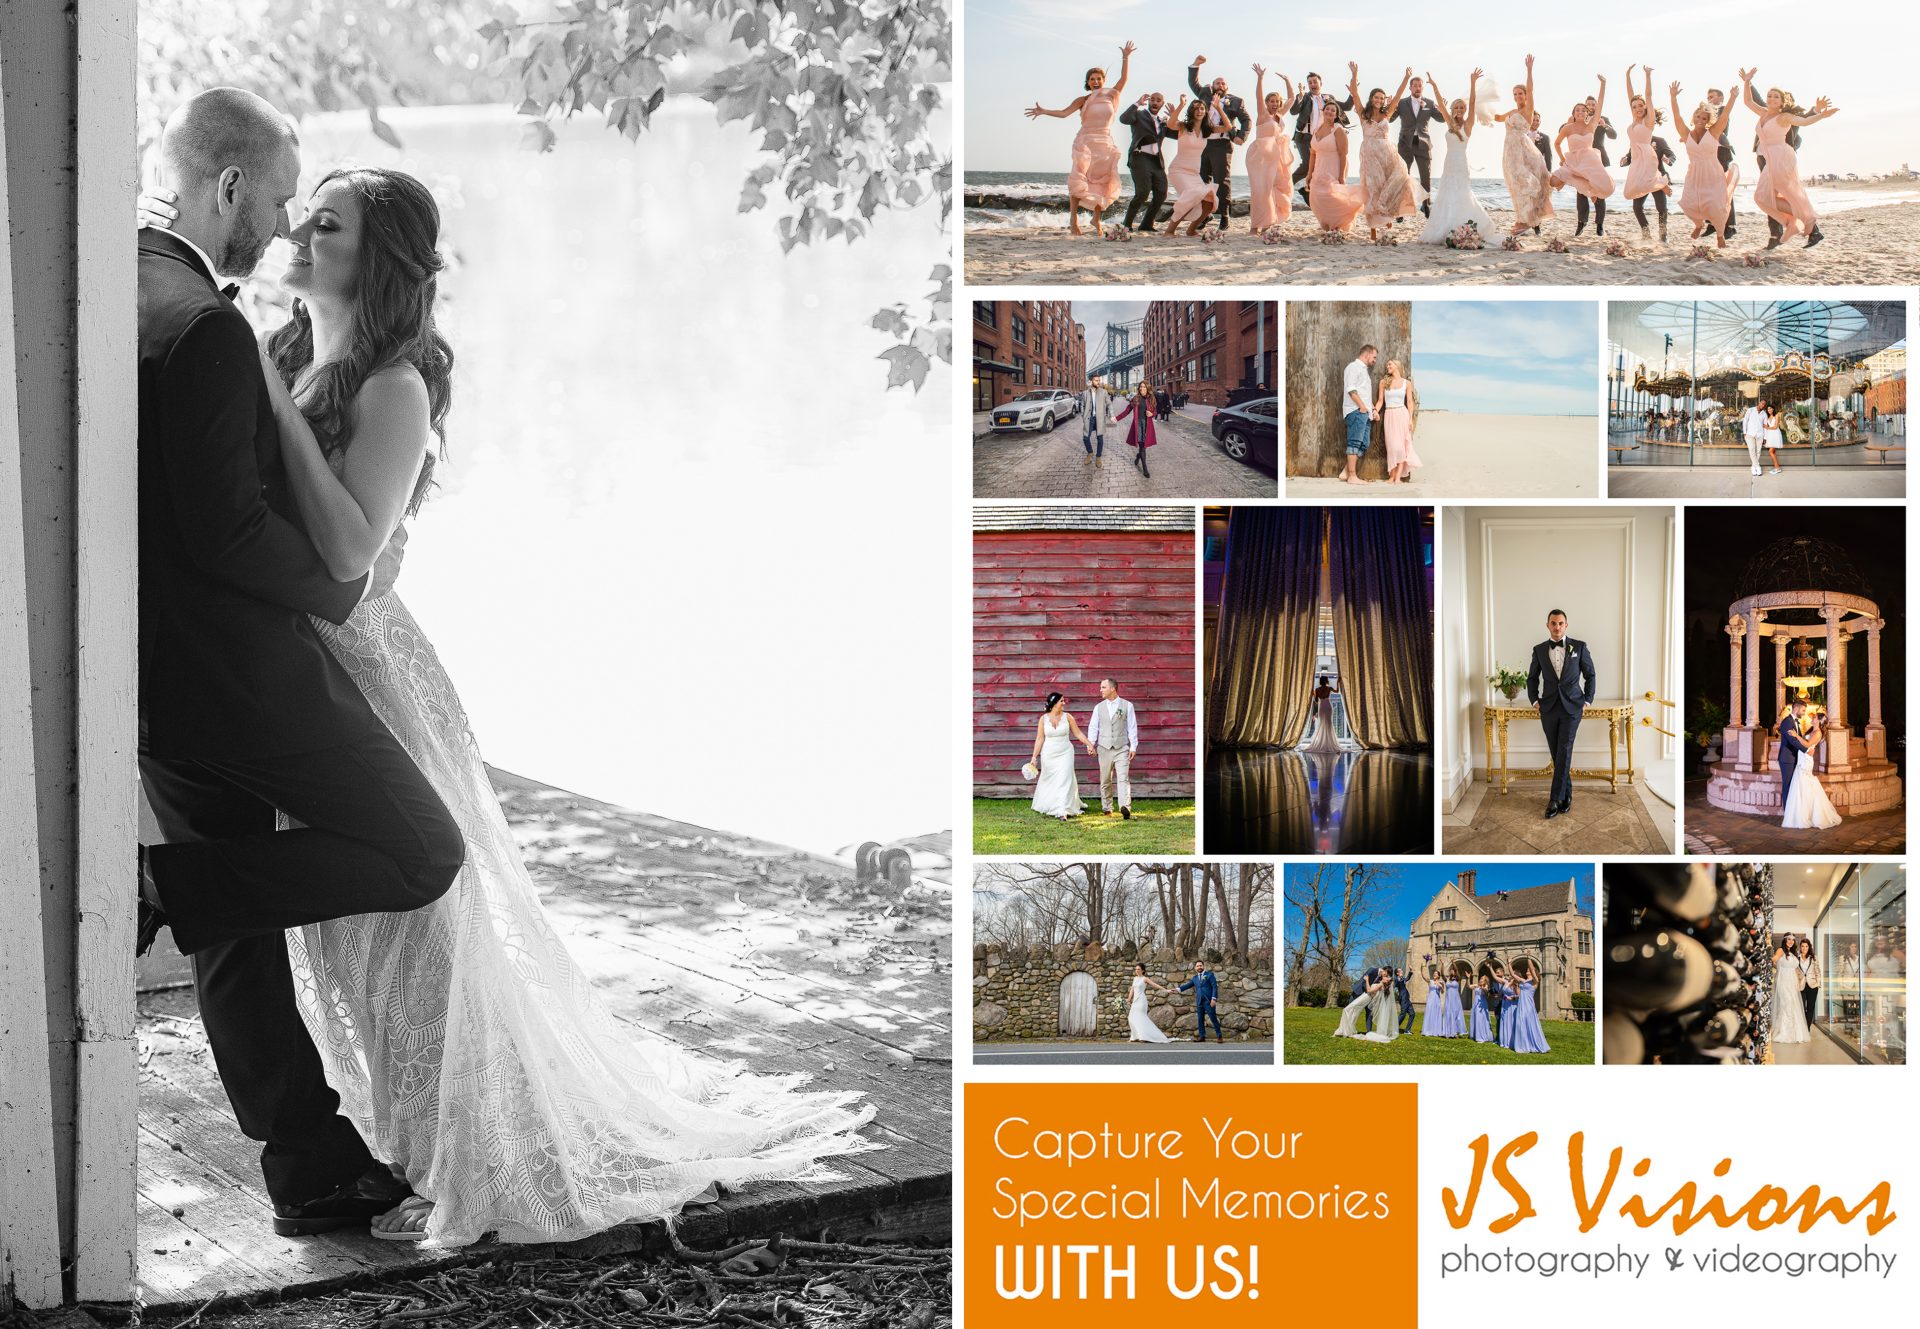 We offer All-inclusive wedding collections. Contact us to schedule a complimentary wedding consultation!